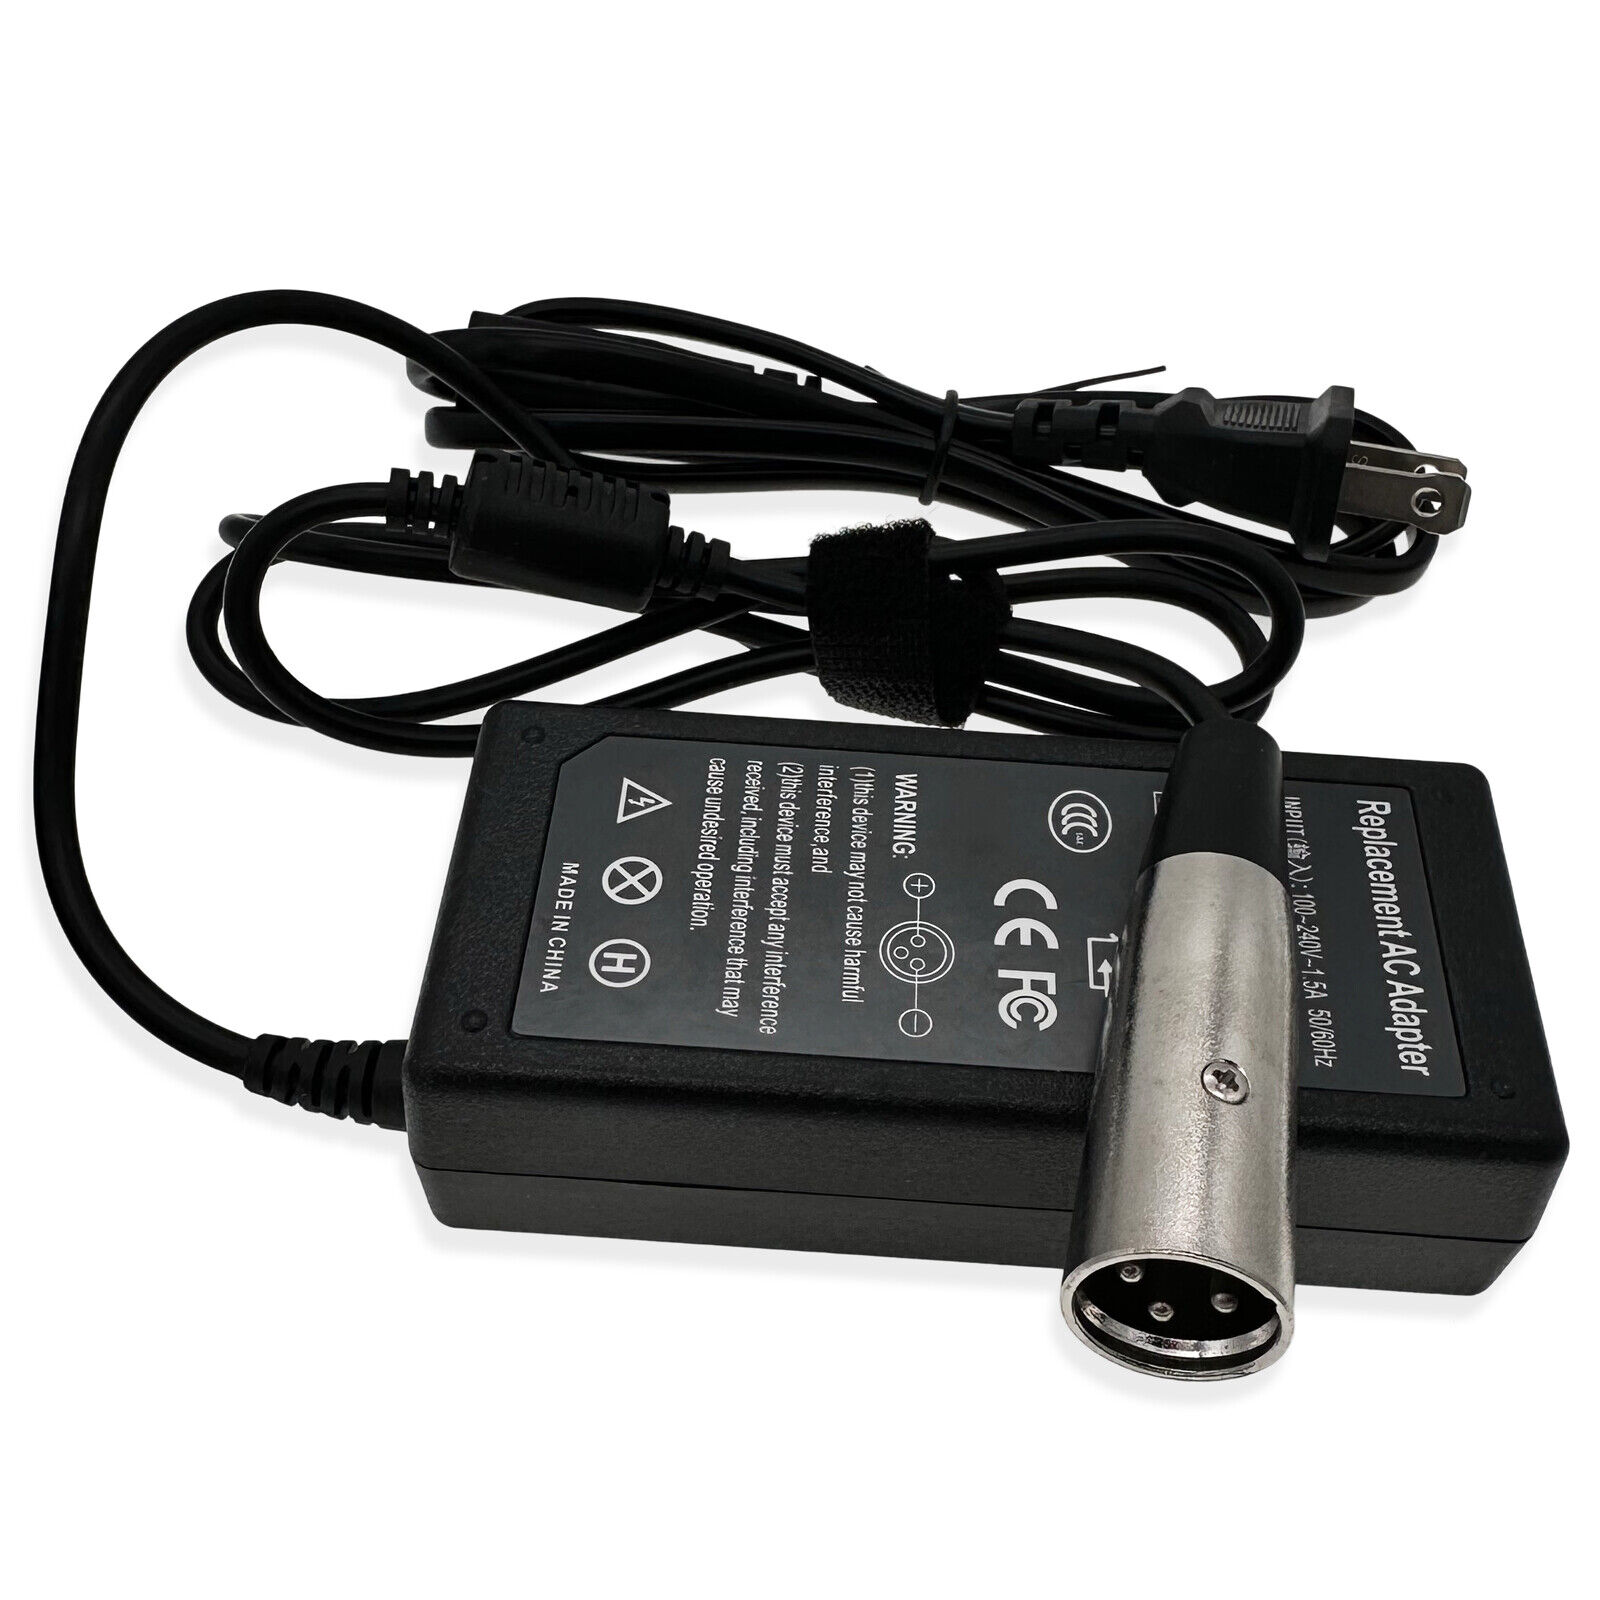 24V 2A Battery Charger for Mongoose Z350 COSMIC FUSION HORNET ROCKET FS Scooter 24V 2A Battery Charger for Mongoose Z35